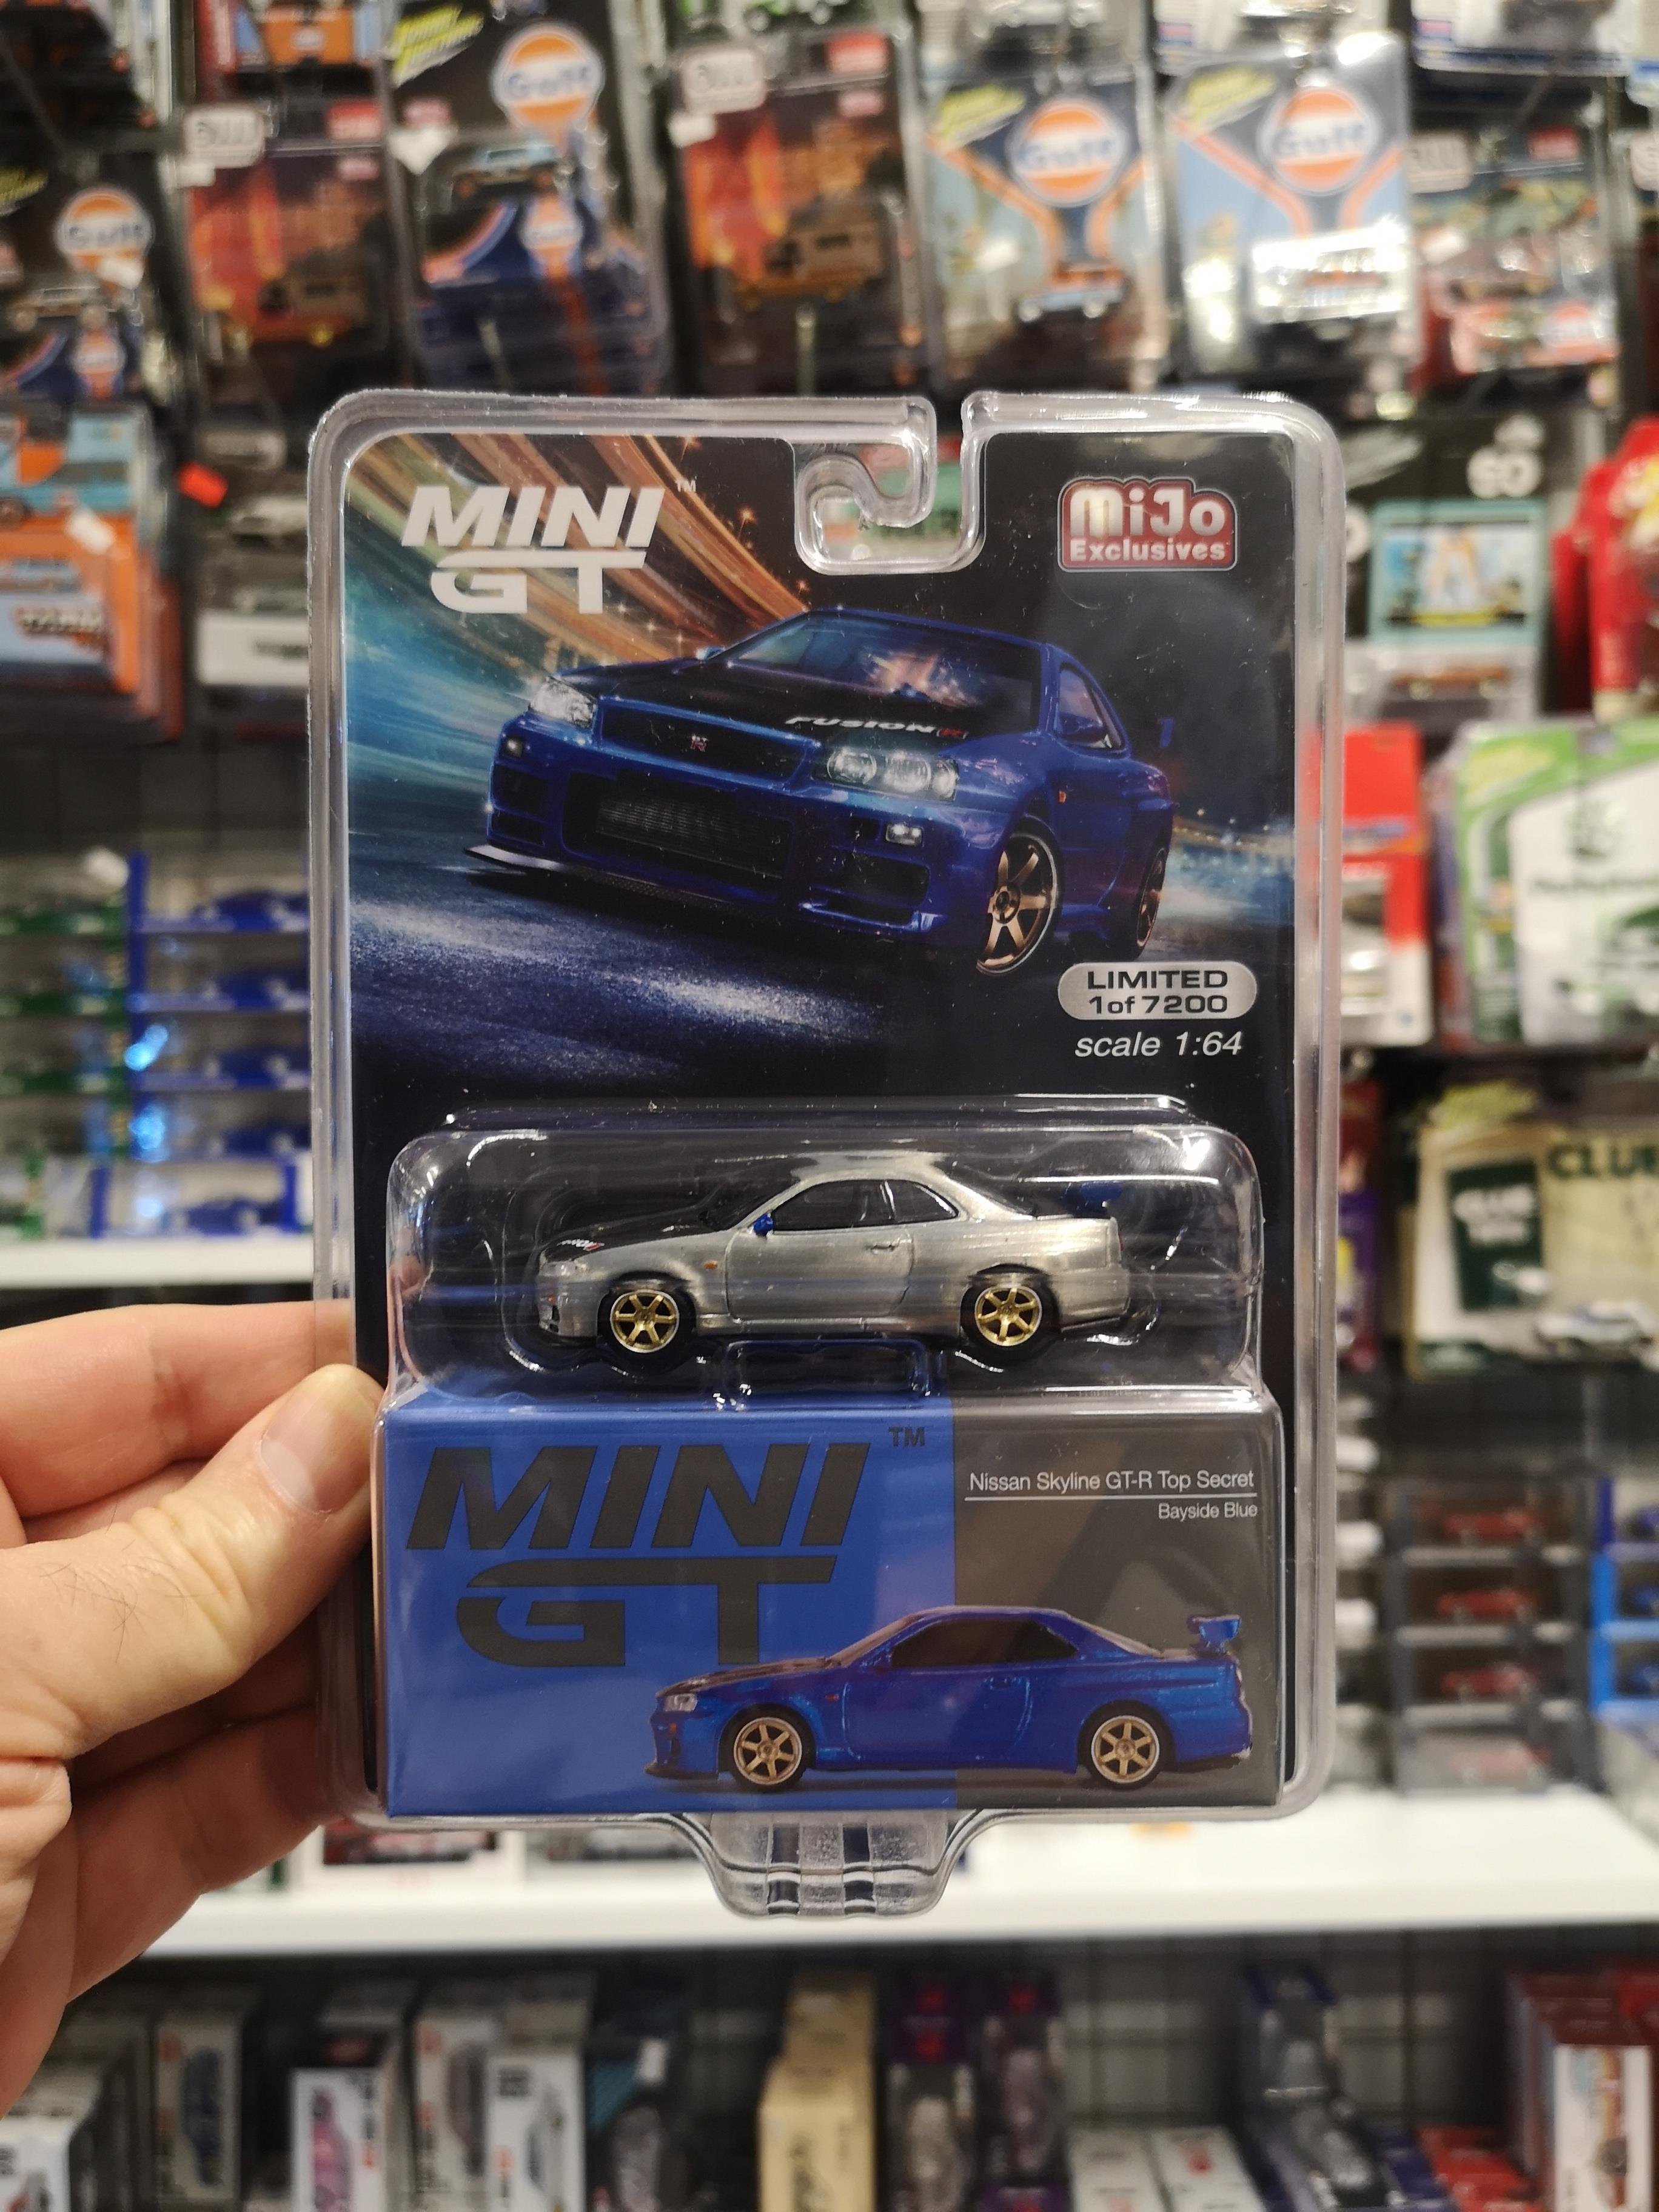 Mini GT Chase